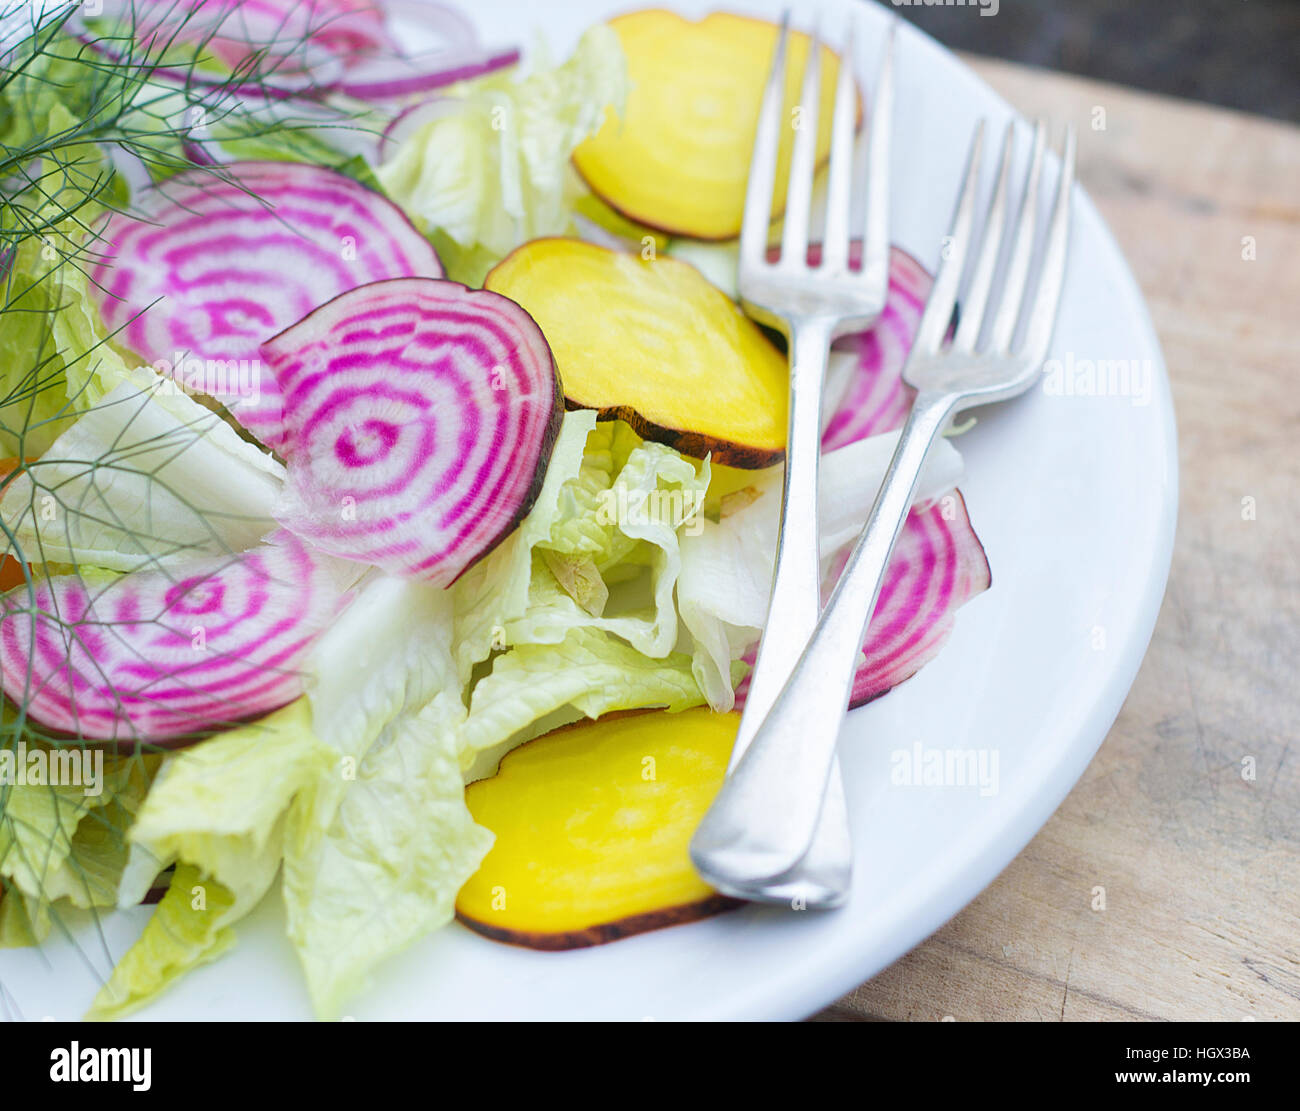 Purple and yellow beetroot salad with antique cutlery on white plate, wooden board. Stock Photo